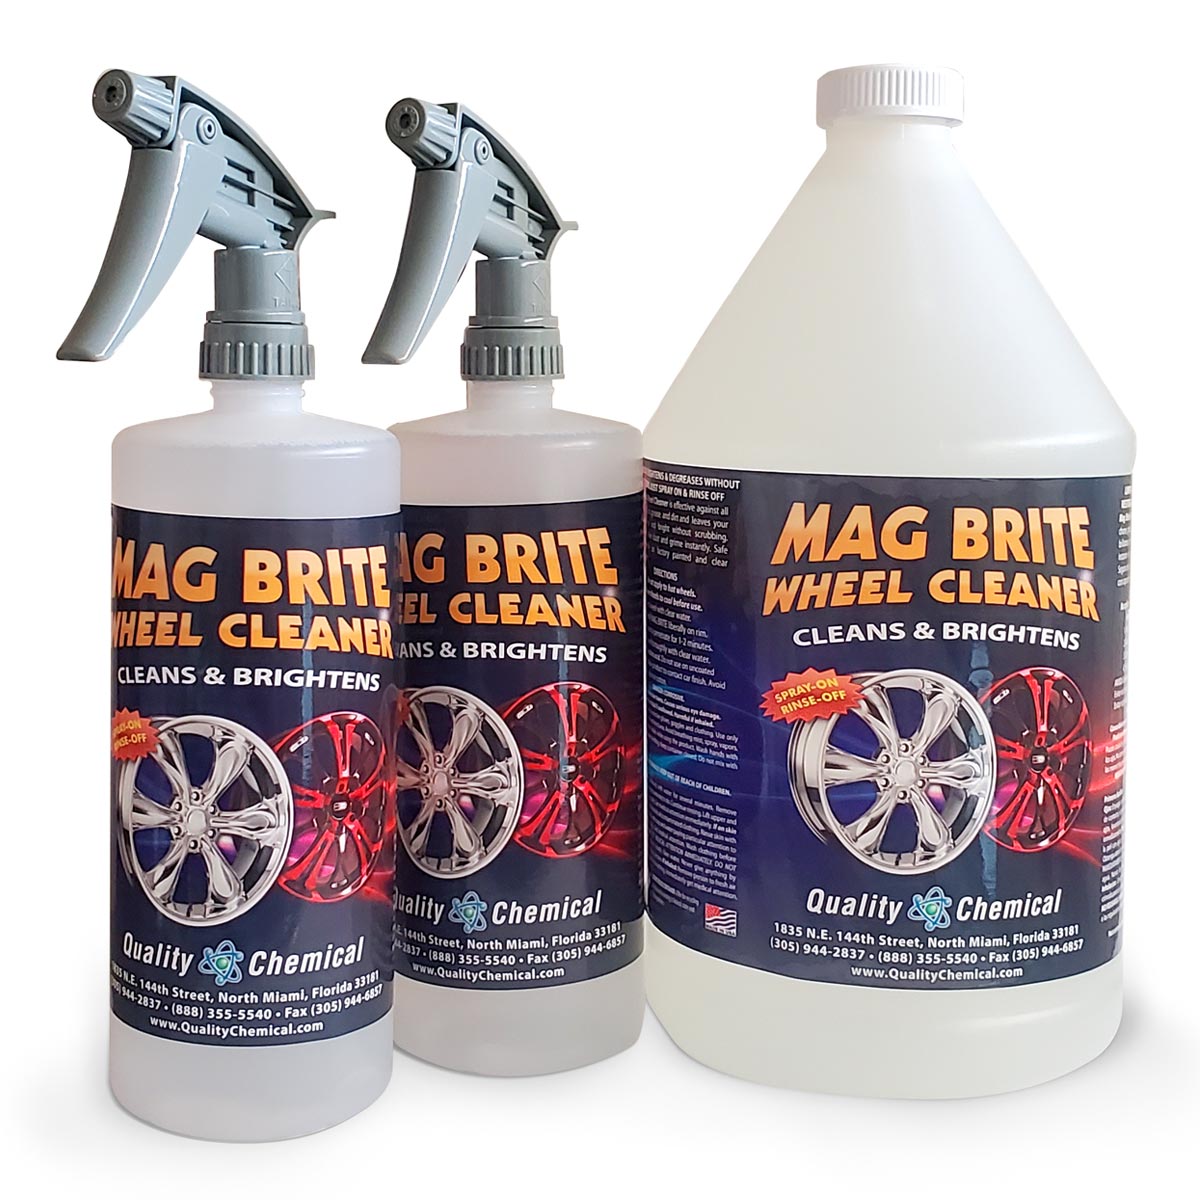 Mag Brite Wheel Cleaner Combo